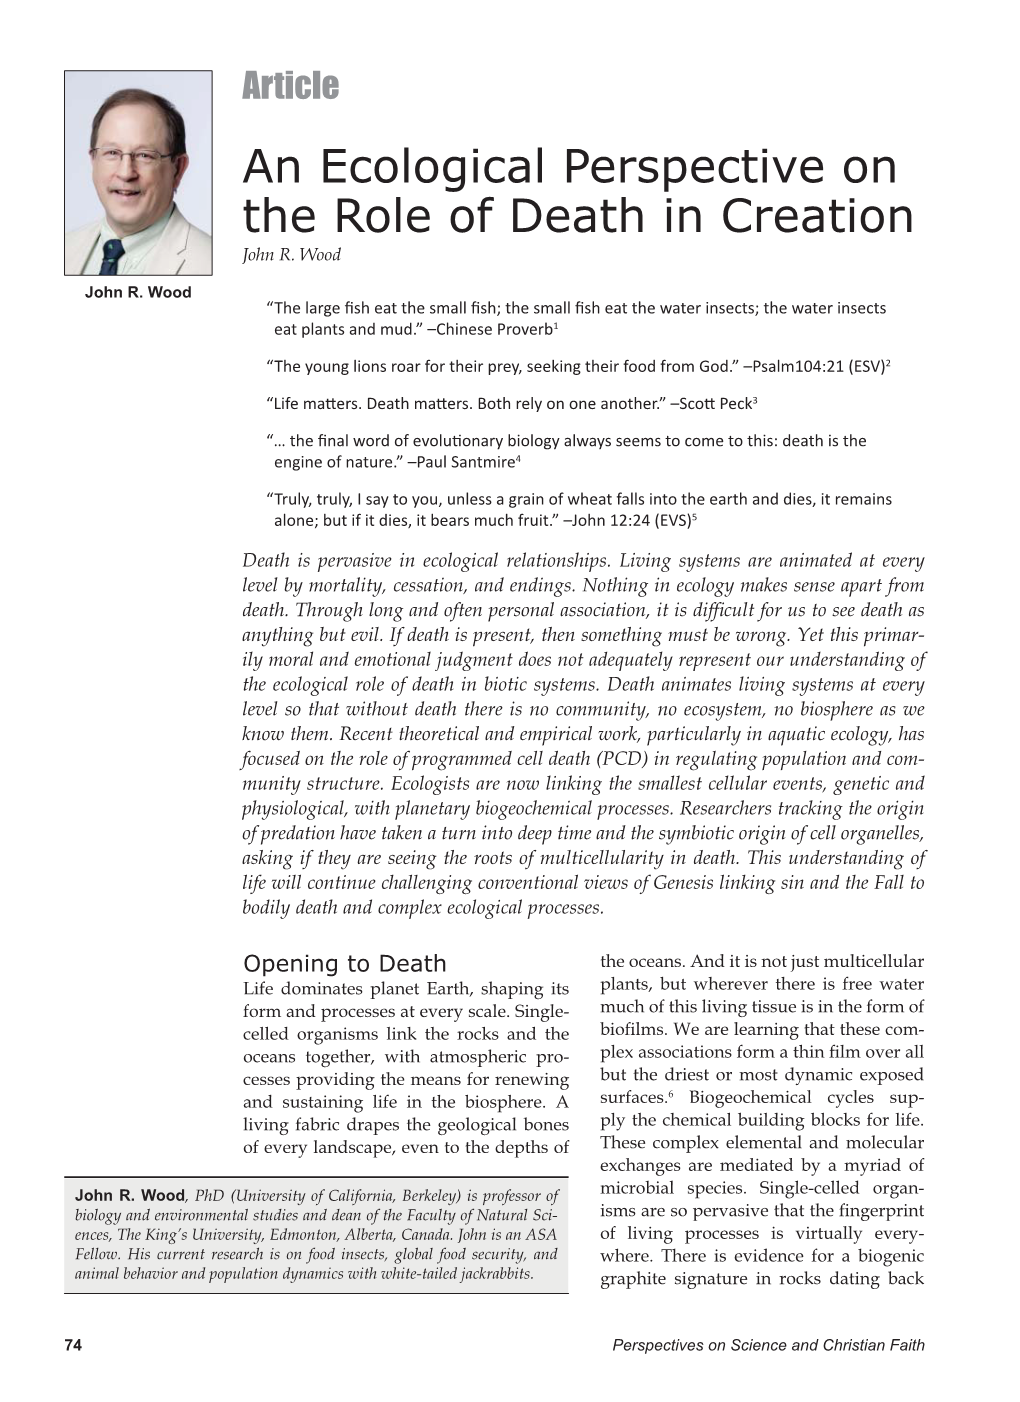 An Ecological Perspective on the Role of Death in Creation John R